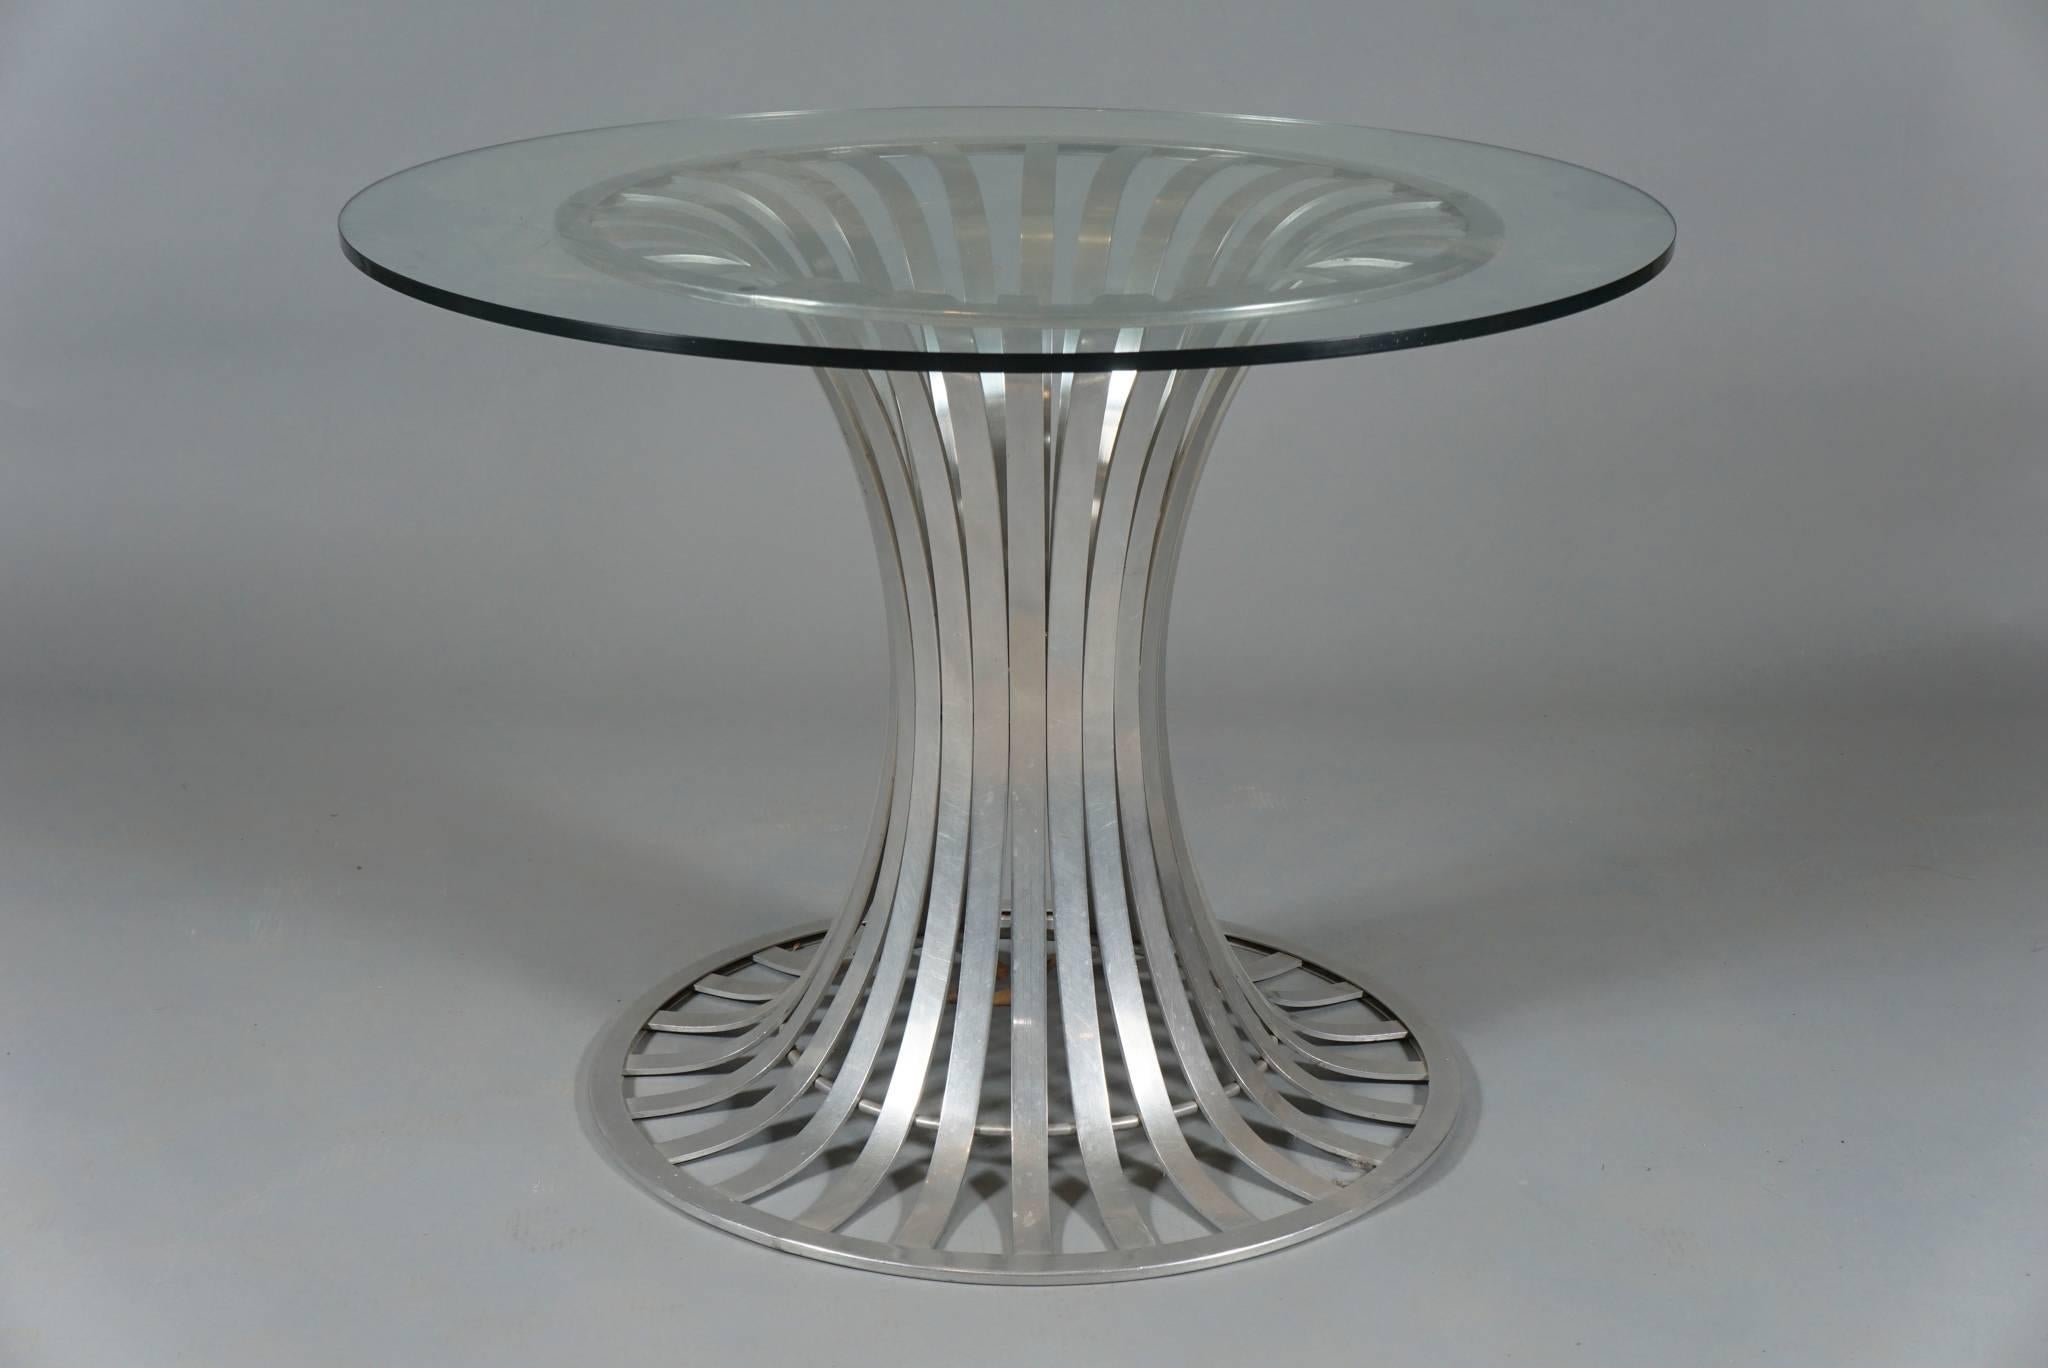 Three-piece patio set by American Furniture Company Woodard, in aluminium
comprising a round glass-topped table and two chairs. Table dimensions below. Chairs measure: 26